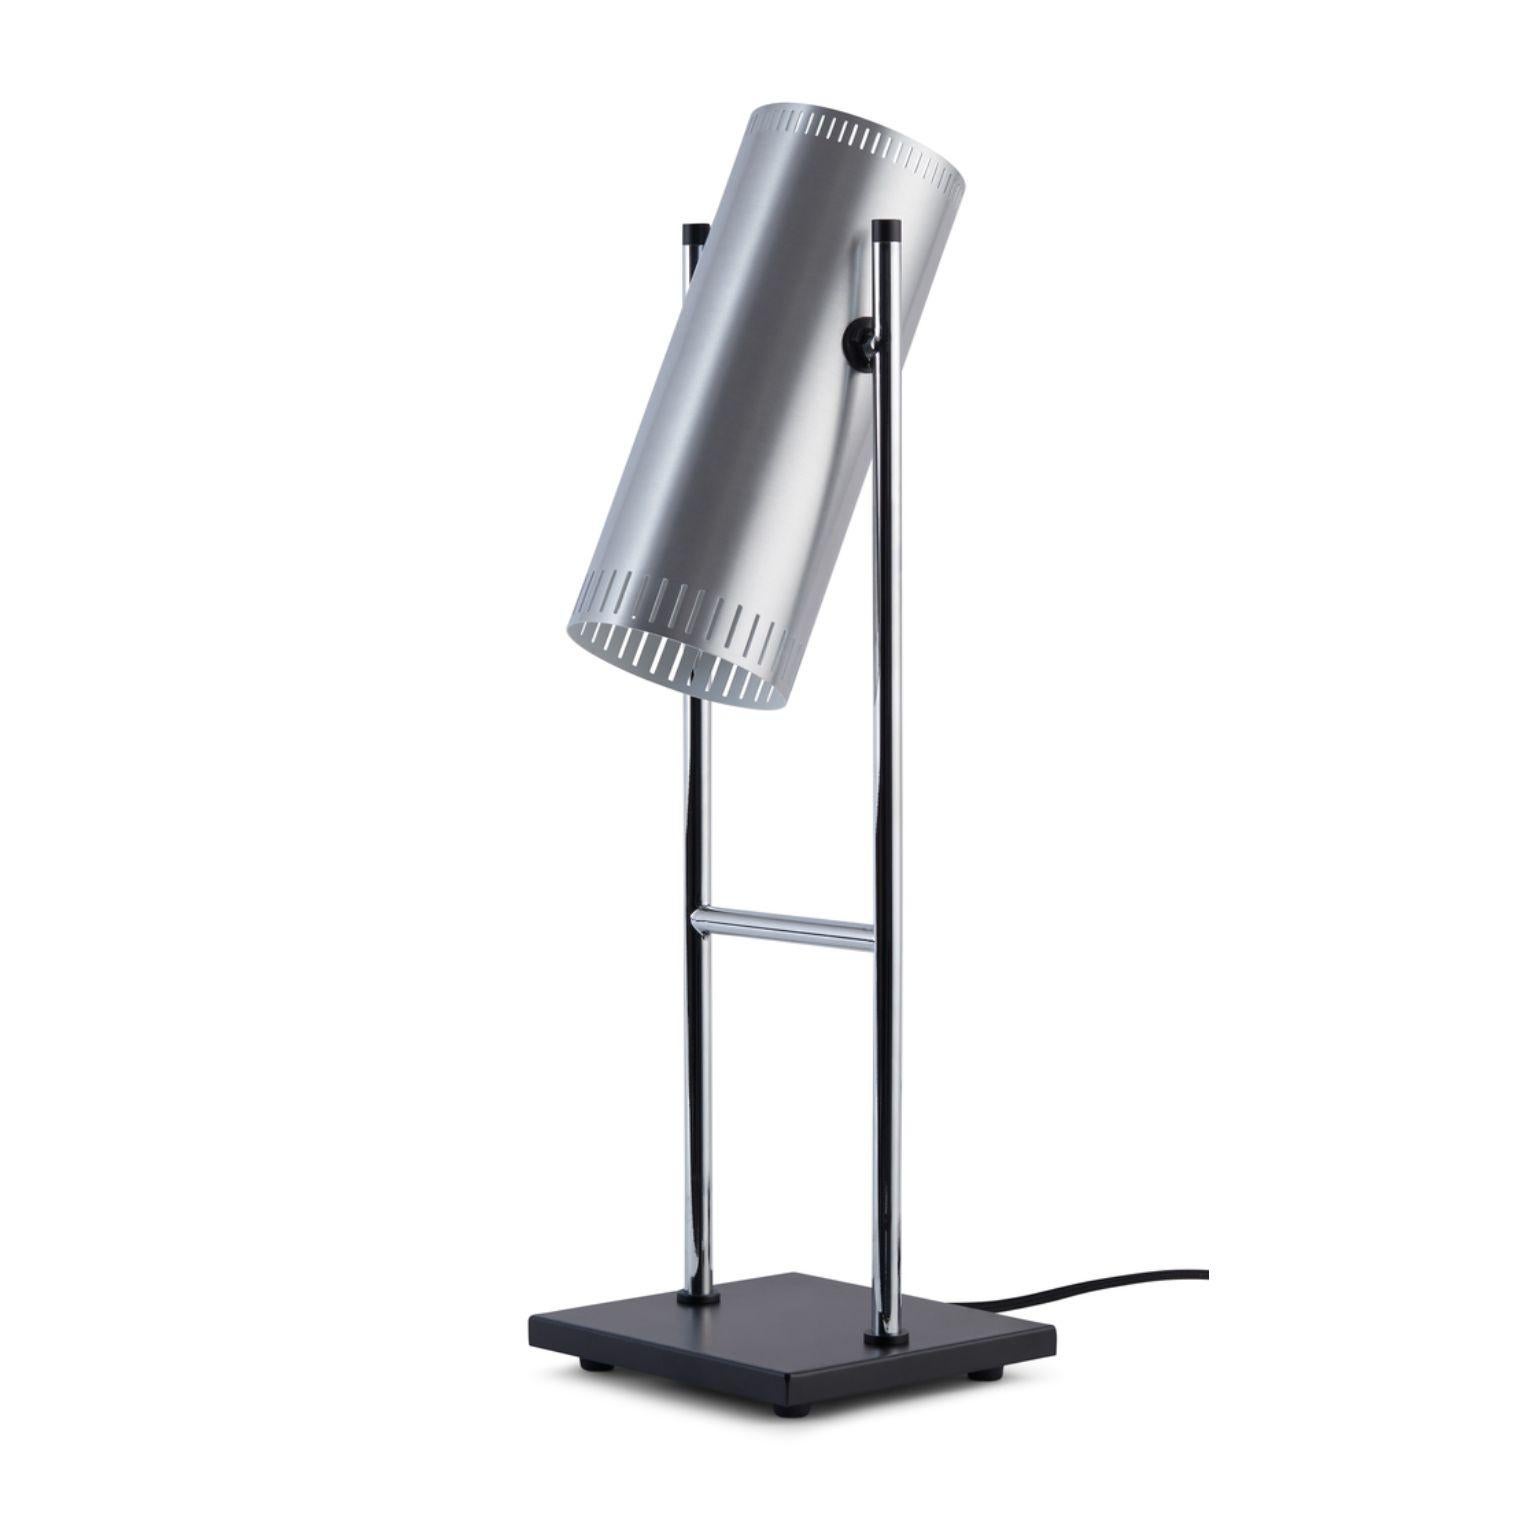 Tambone aluminium table lamp by Warm Nordic
Dimensions: D 16 x W 16 x H 56 cm
Material: Brushed aluminium
Weight: 2 kg
Also available in different finishes.

Warm Nordic is an ambitious design brand anchored in Nordic design history and with a